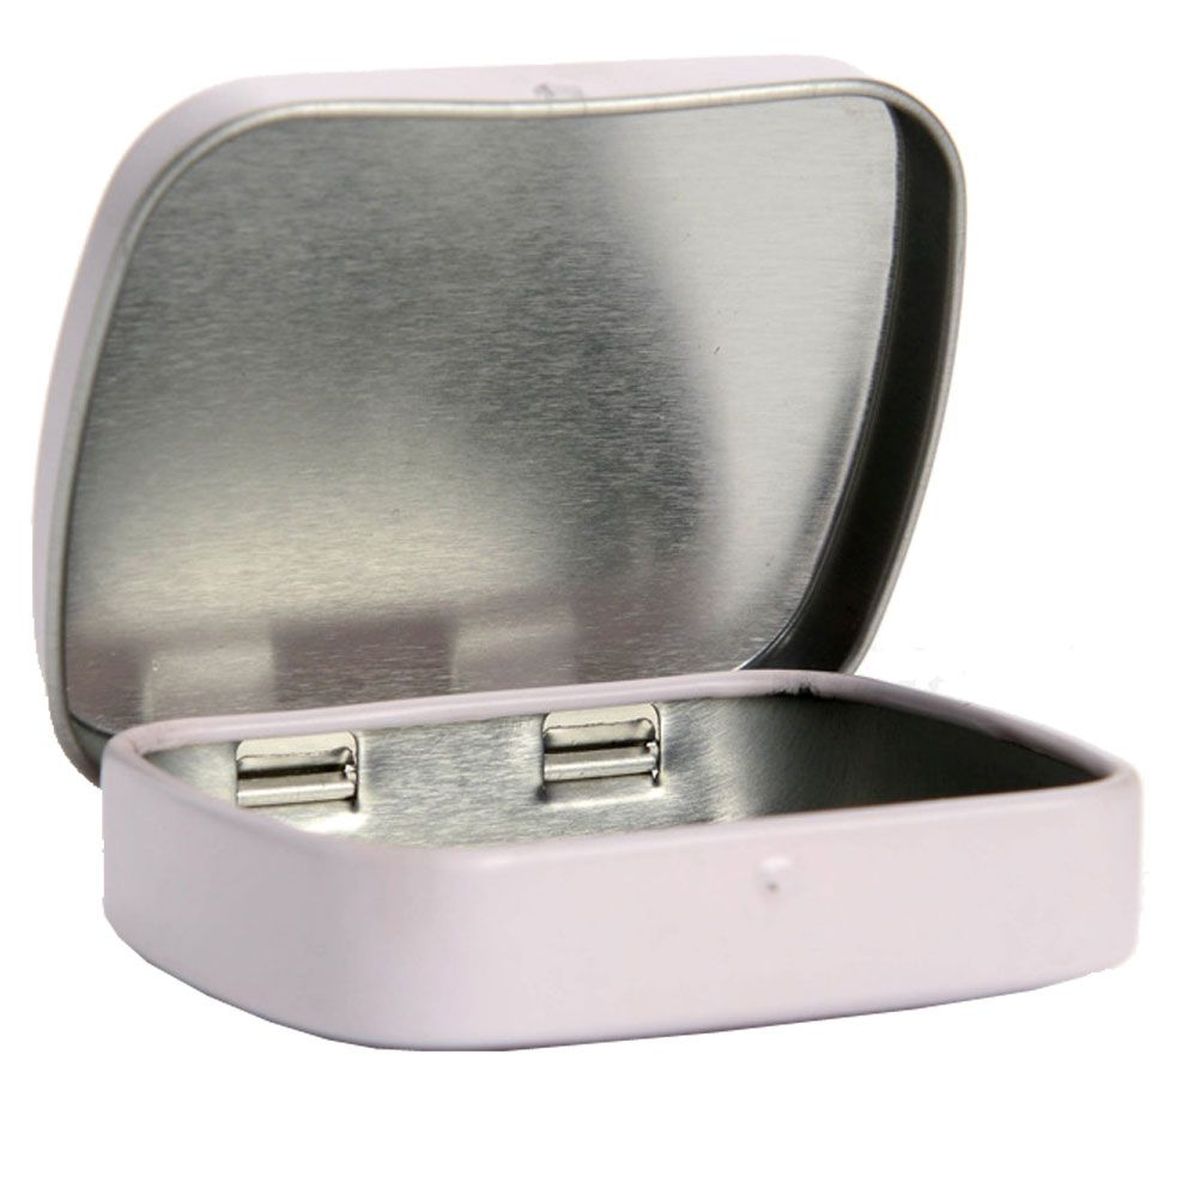 Mtal Small box for baby teeth - Pink